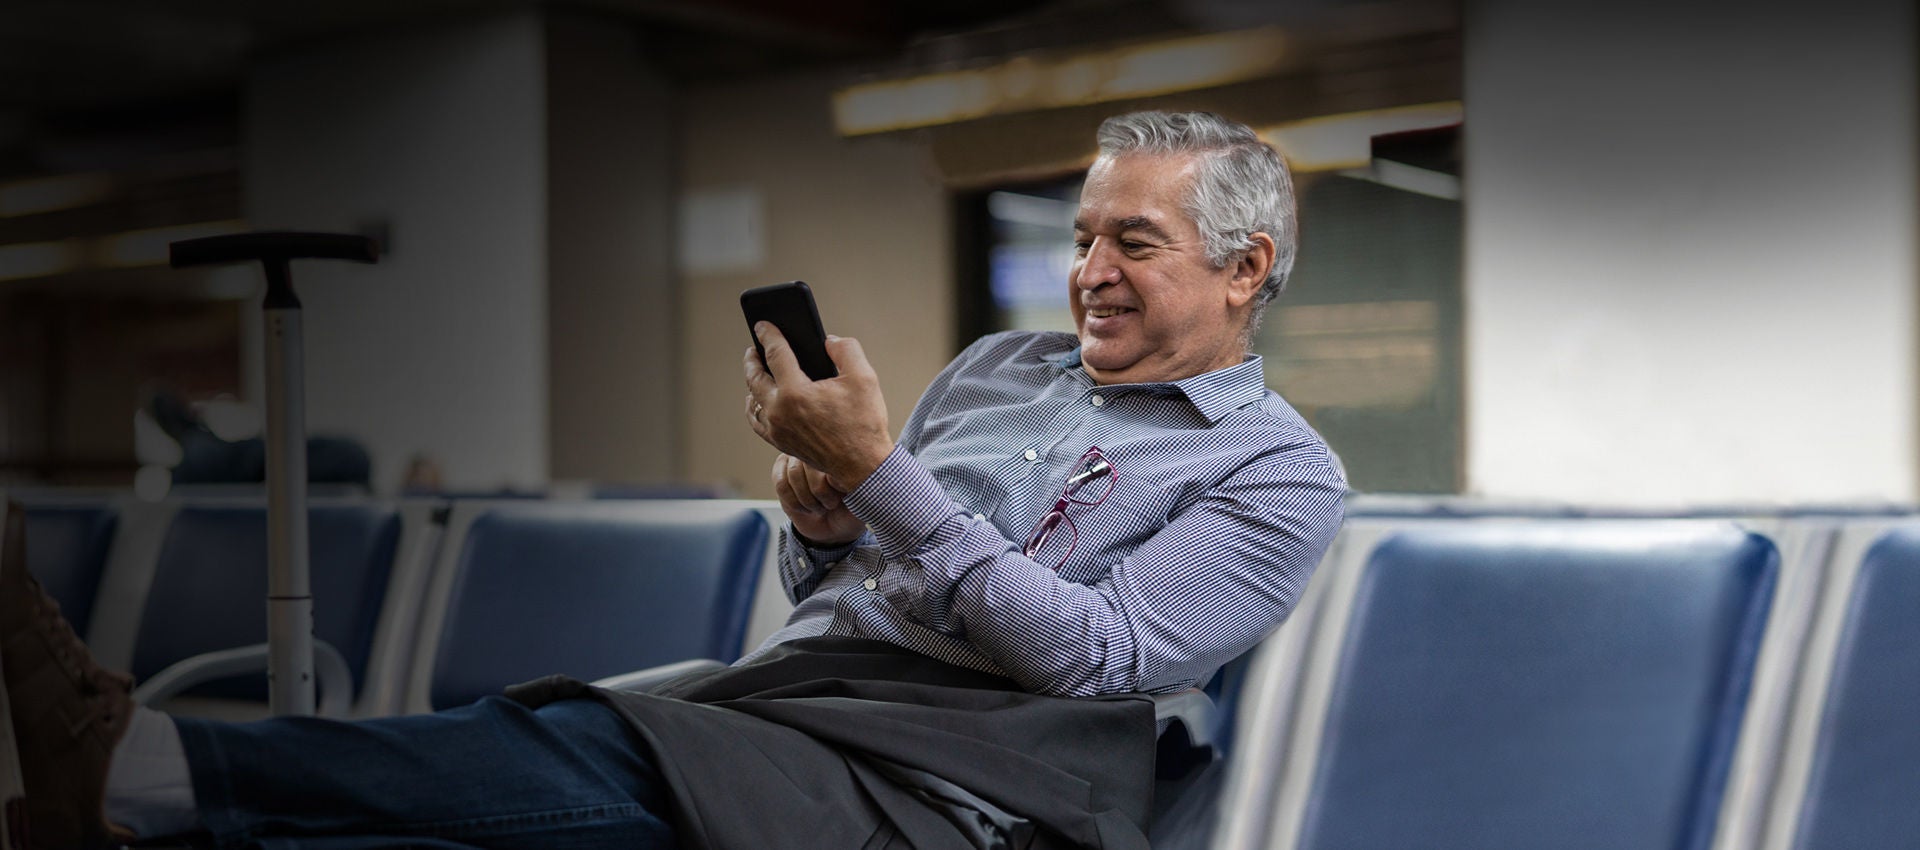 A delighted customer uses his mobile device while waiting at the gate in an airport. 